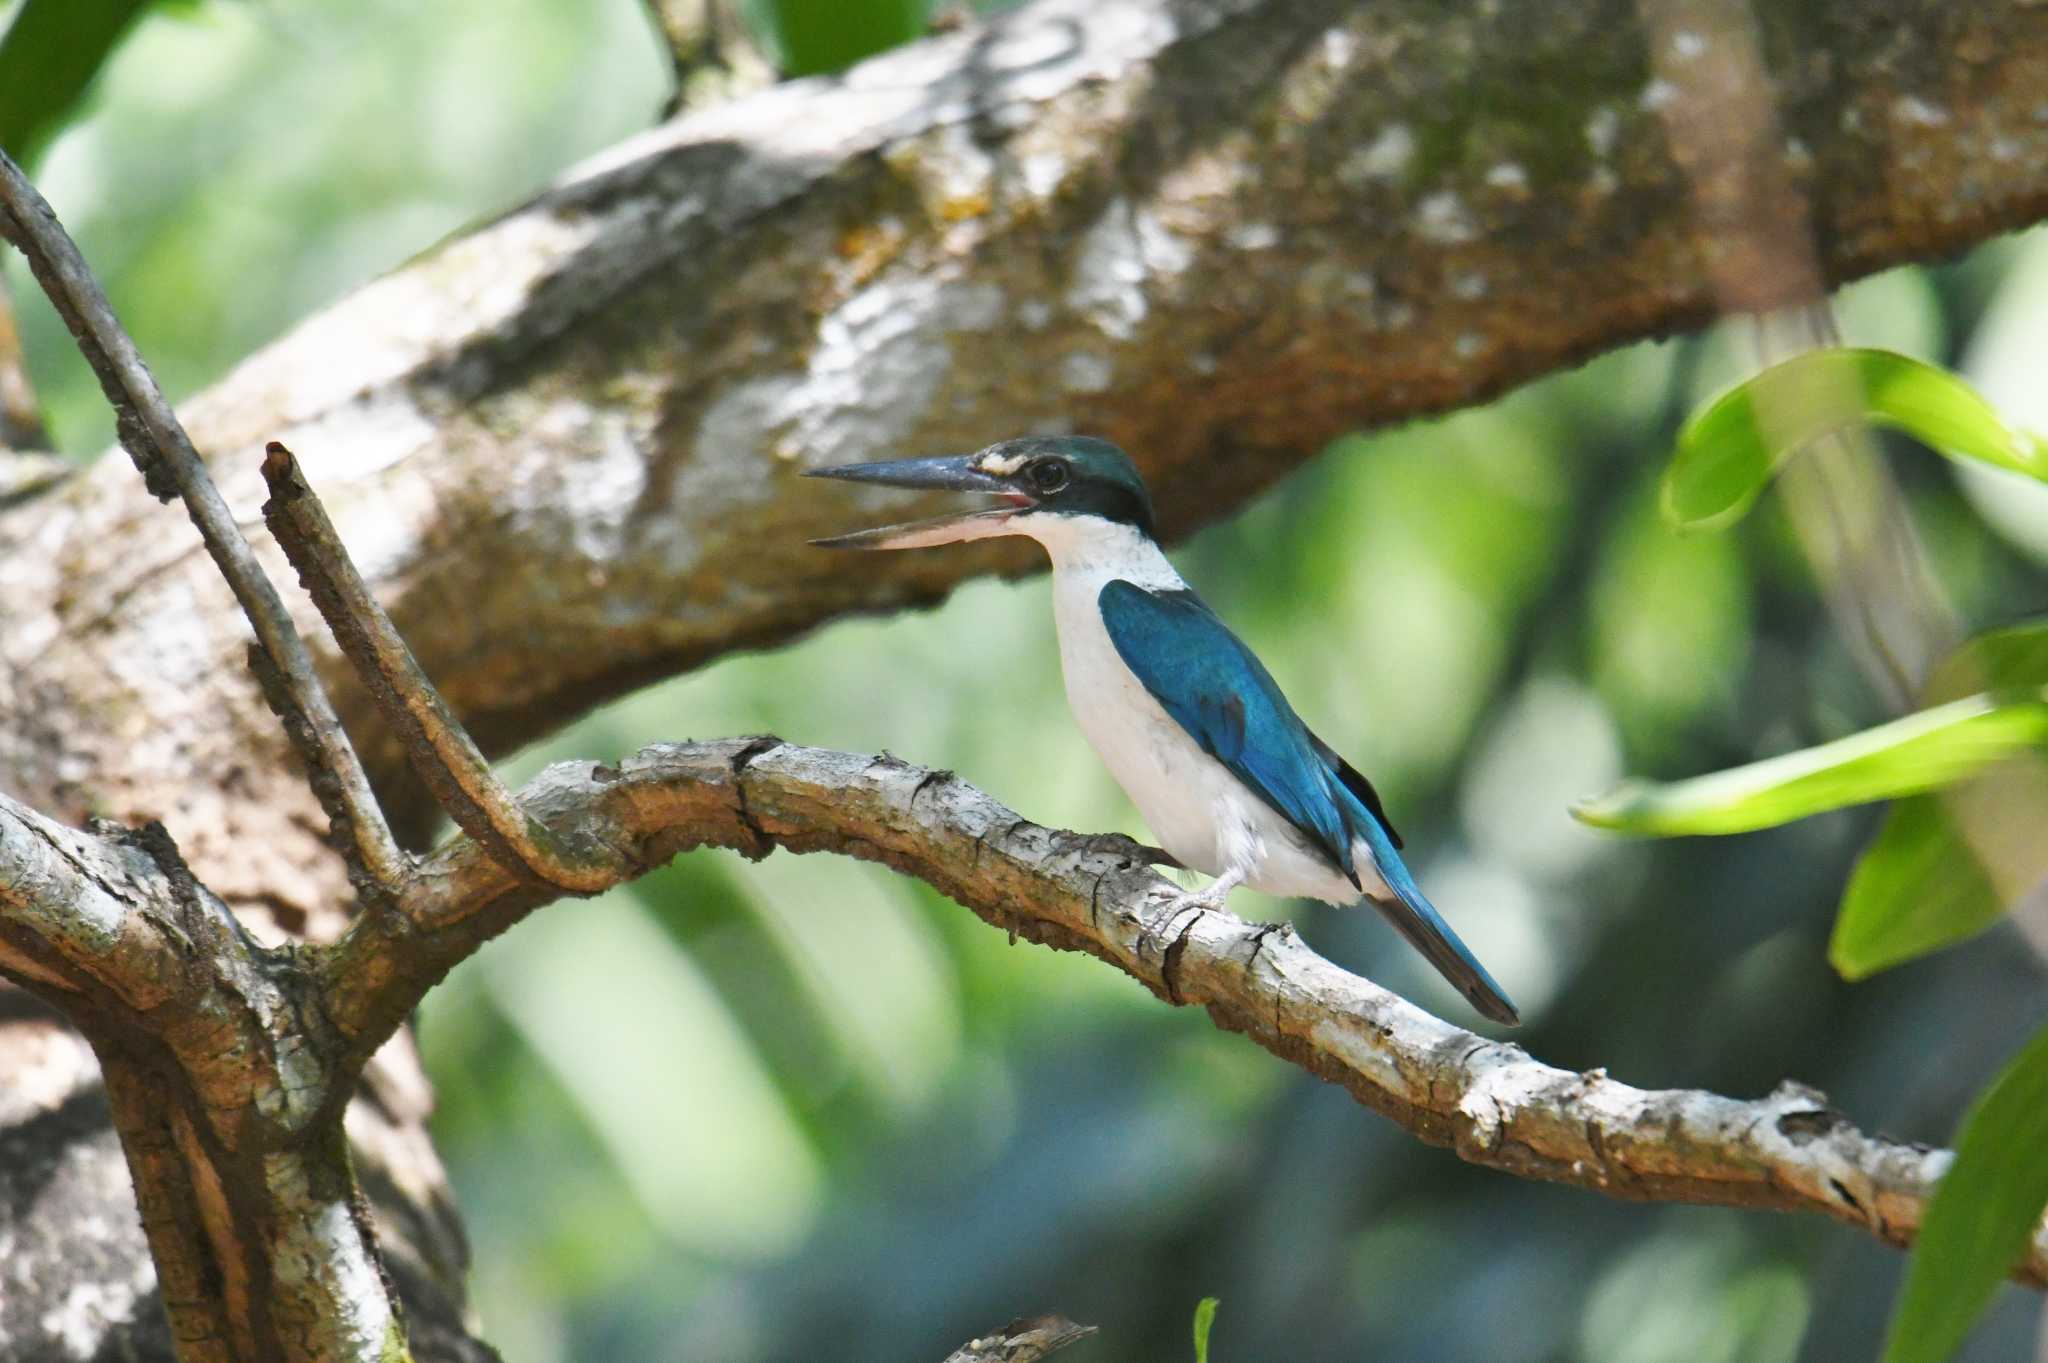 Photo of Collared Kingfisher at パンガーマングローブ林研究センター by あひる